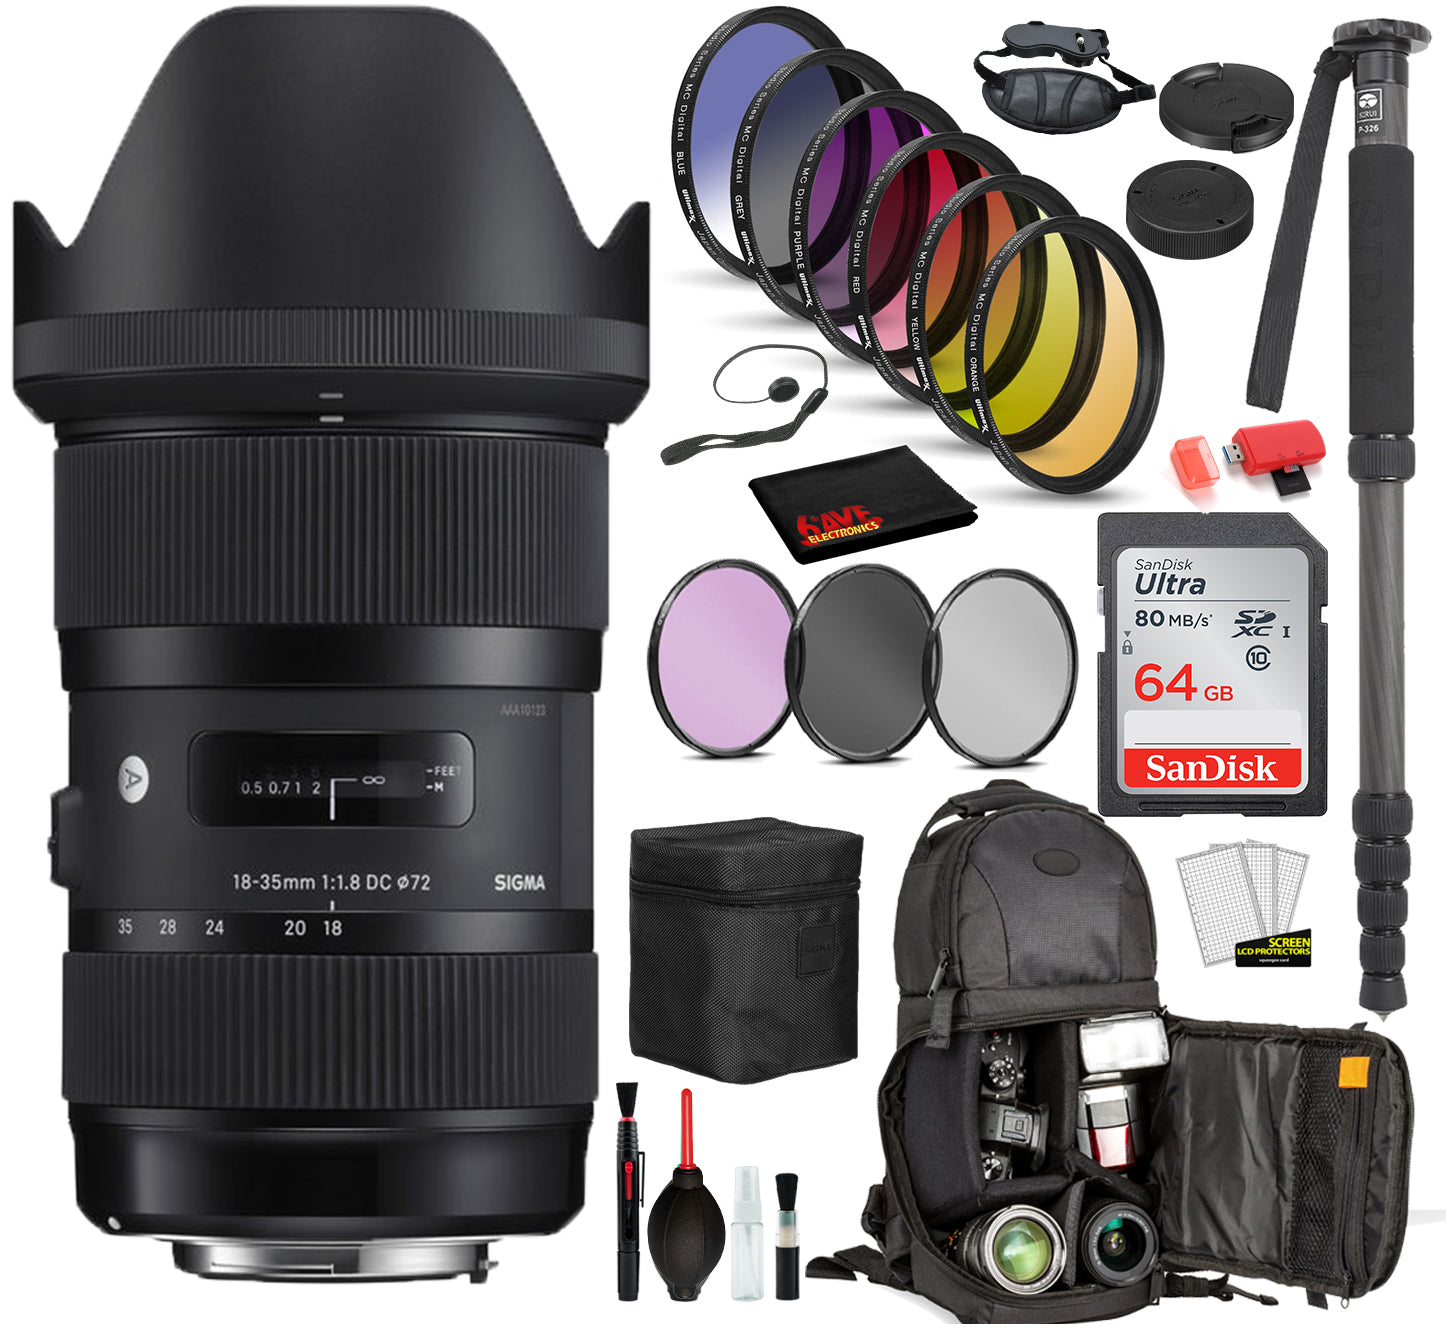 Sigma 18-35mm f/1.8 DC HSM Art Lens for Nikon F with Bundle Includes: Sandisk 64gb SD Card, 9PC Filter Kit + More